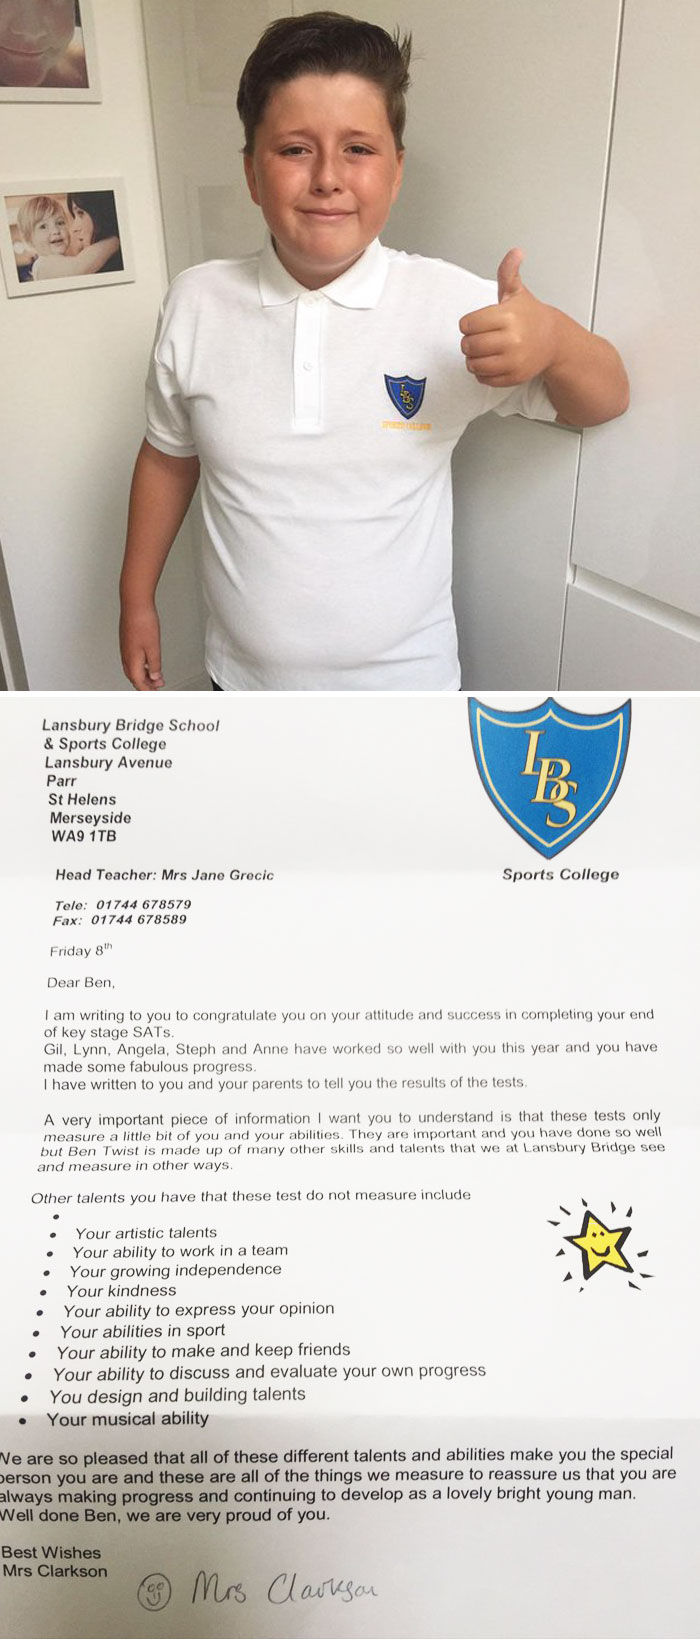 Boy With Autism Fails Exams, Receives The Most Touching Letter From School